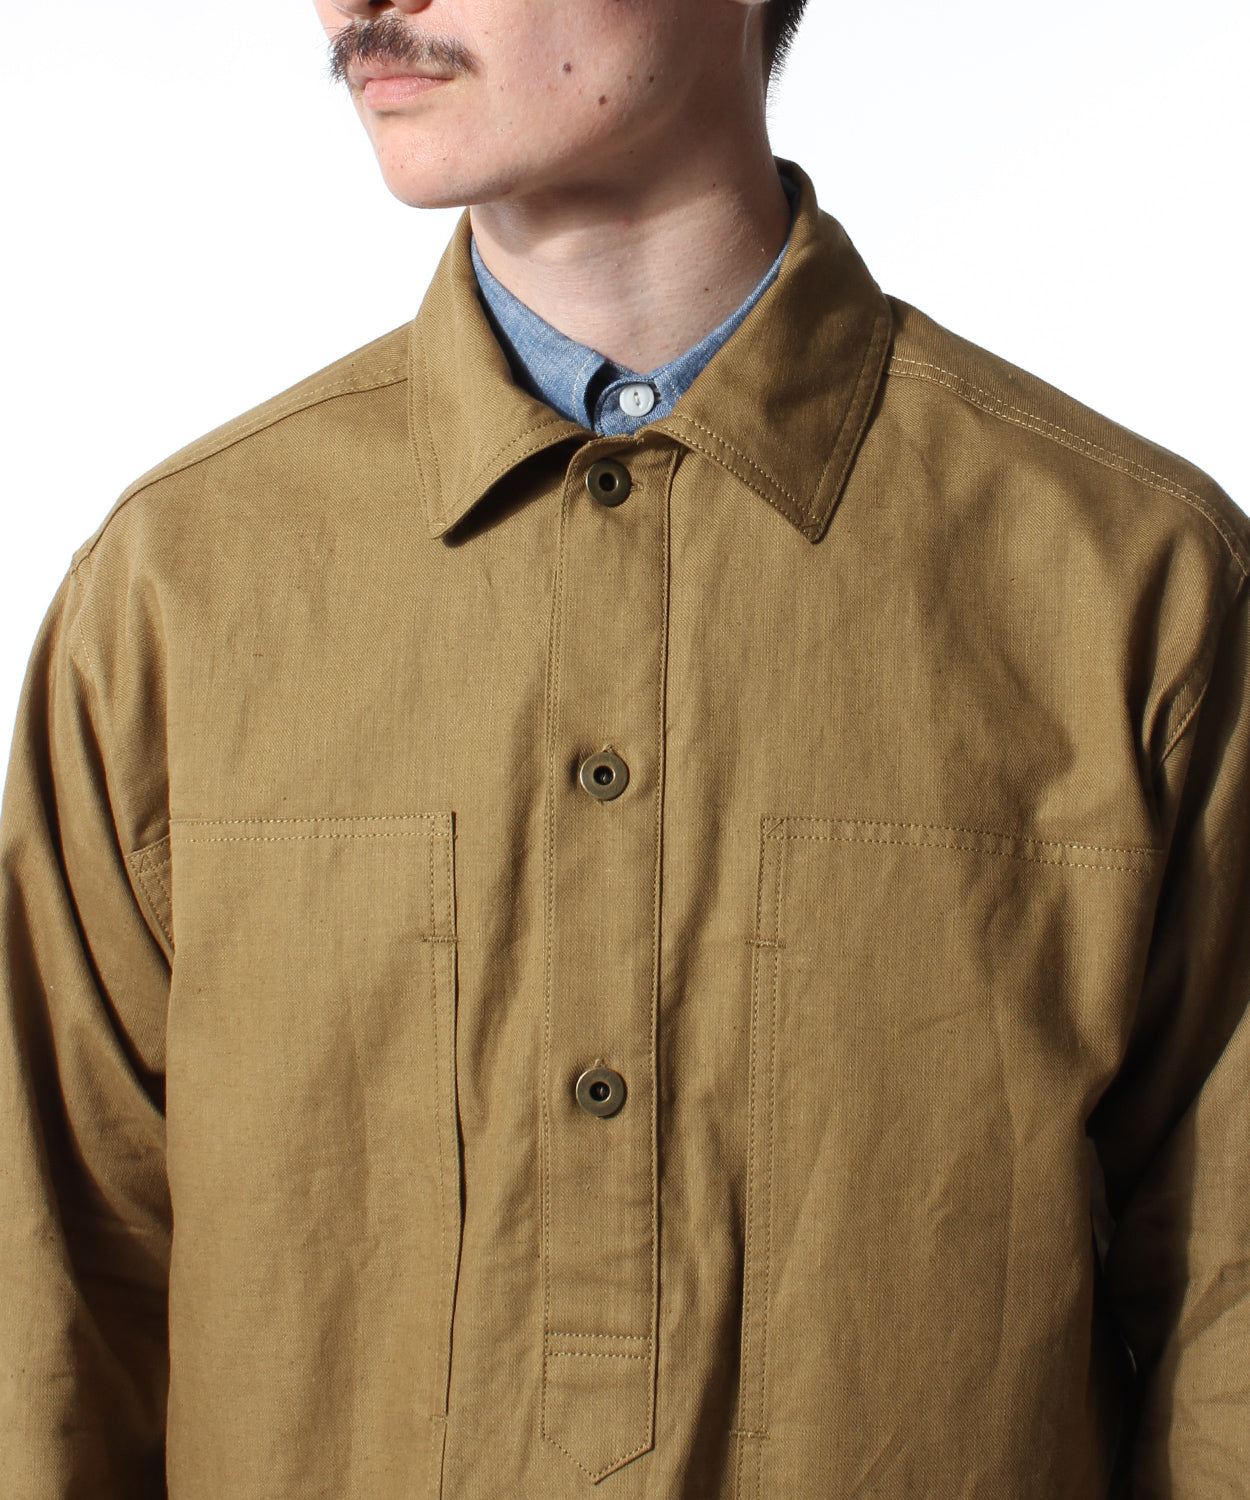 【 24SS】ANATOMICA 1918 PULLOVER ARMY TWILL / OLIVE DRAB